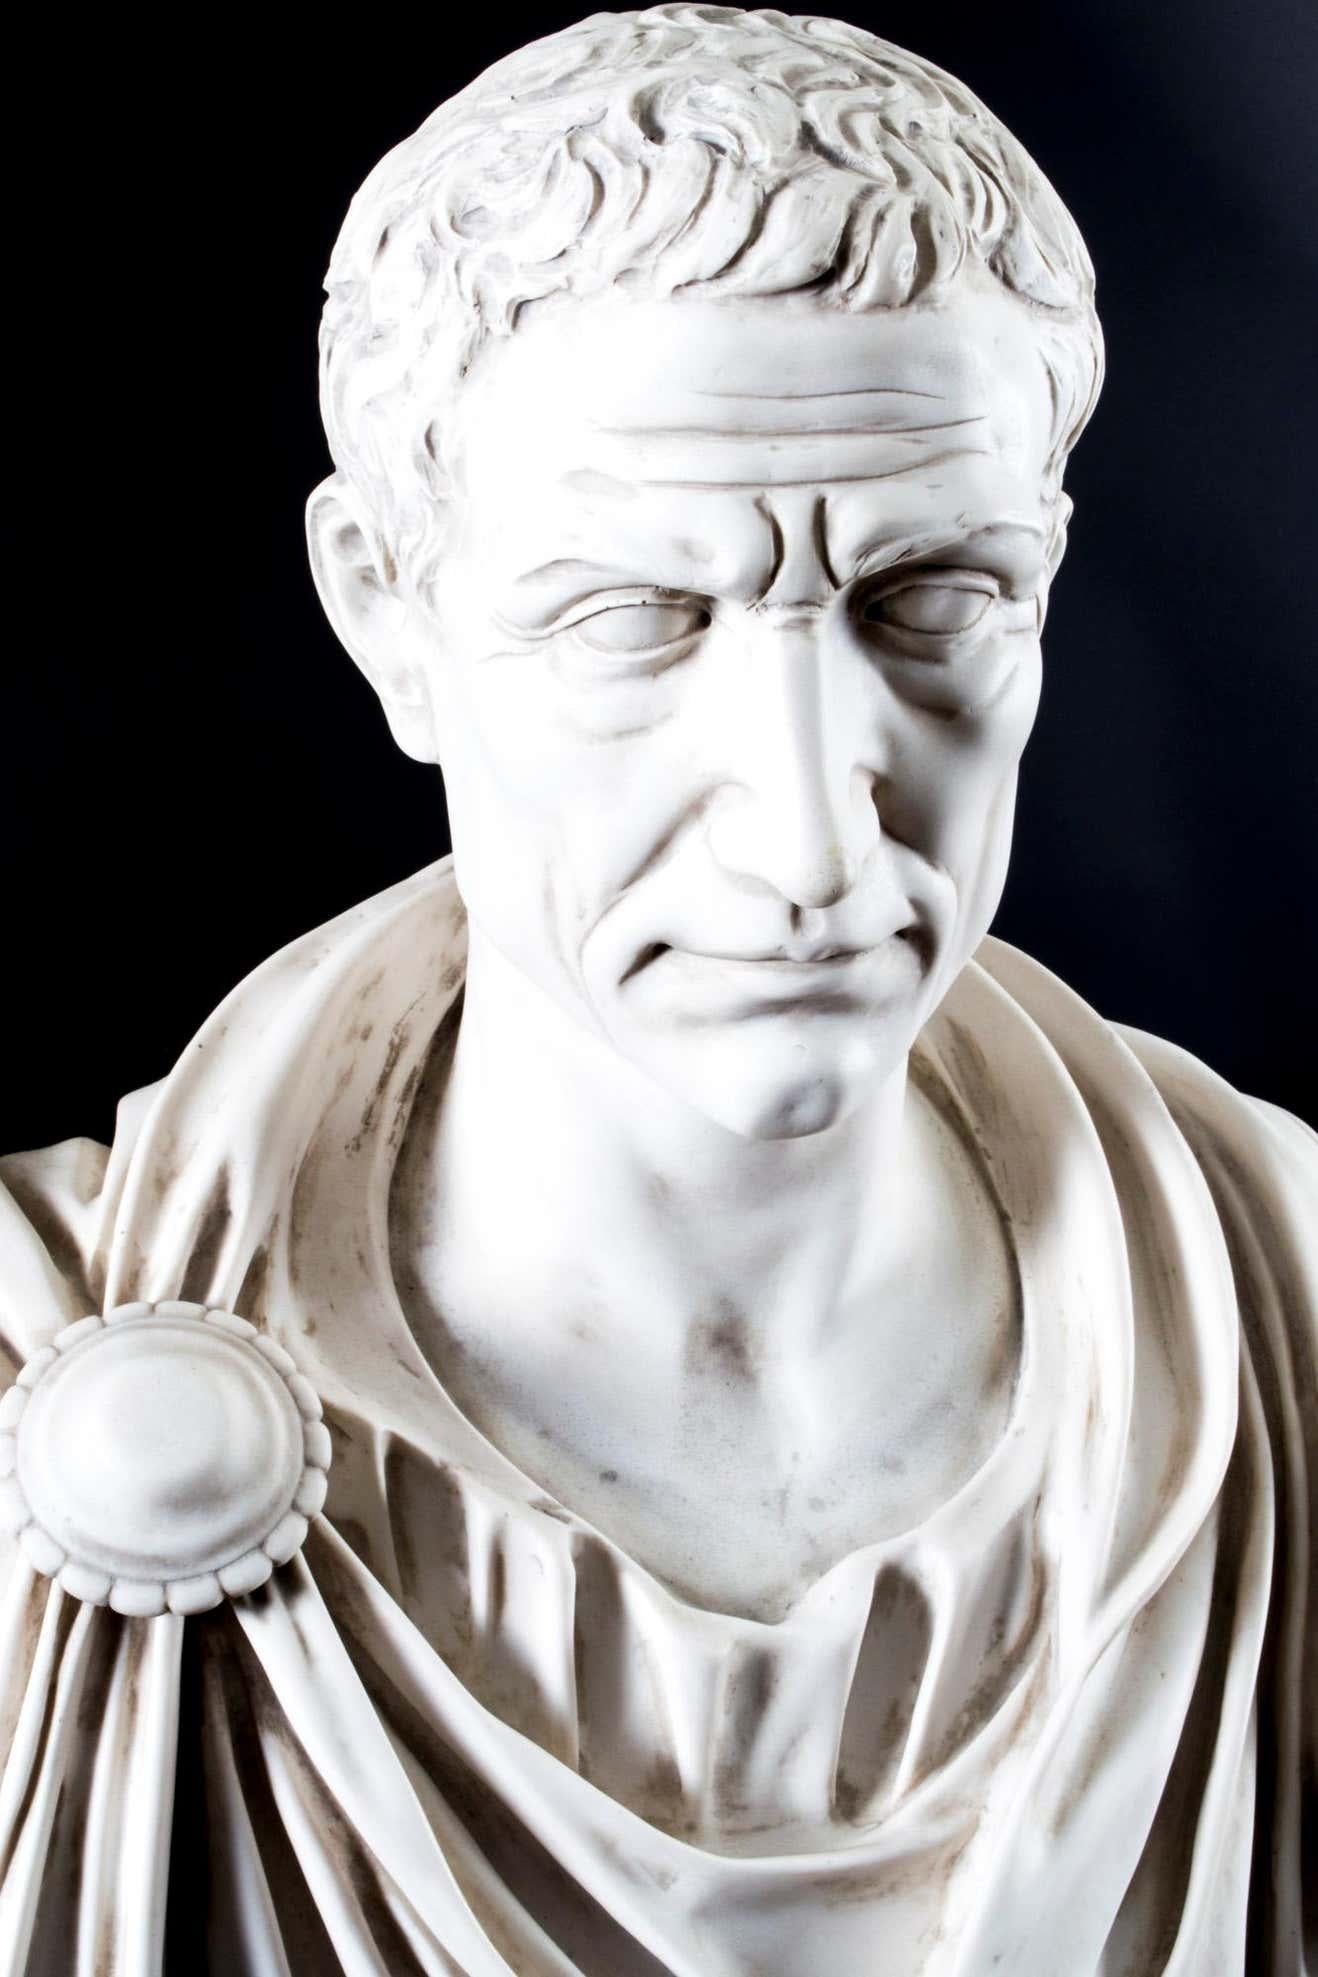 A beautifully sculpted marble bust of the Roman politician Marcus Brutus, dating from the last quarter of the 20th century.

The attention to detail throughout the piece is second to none and the figure is extremely lifelike.

Marcus Junius